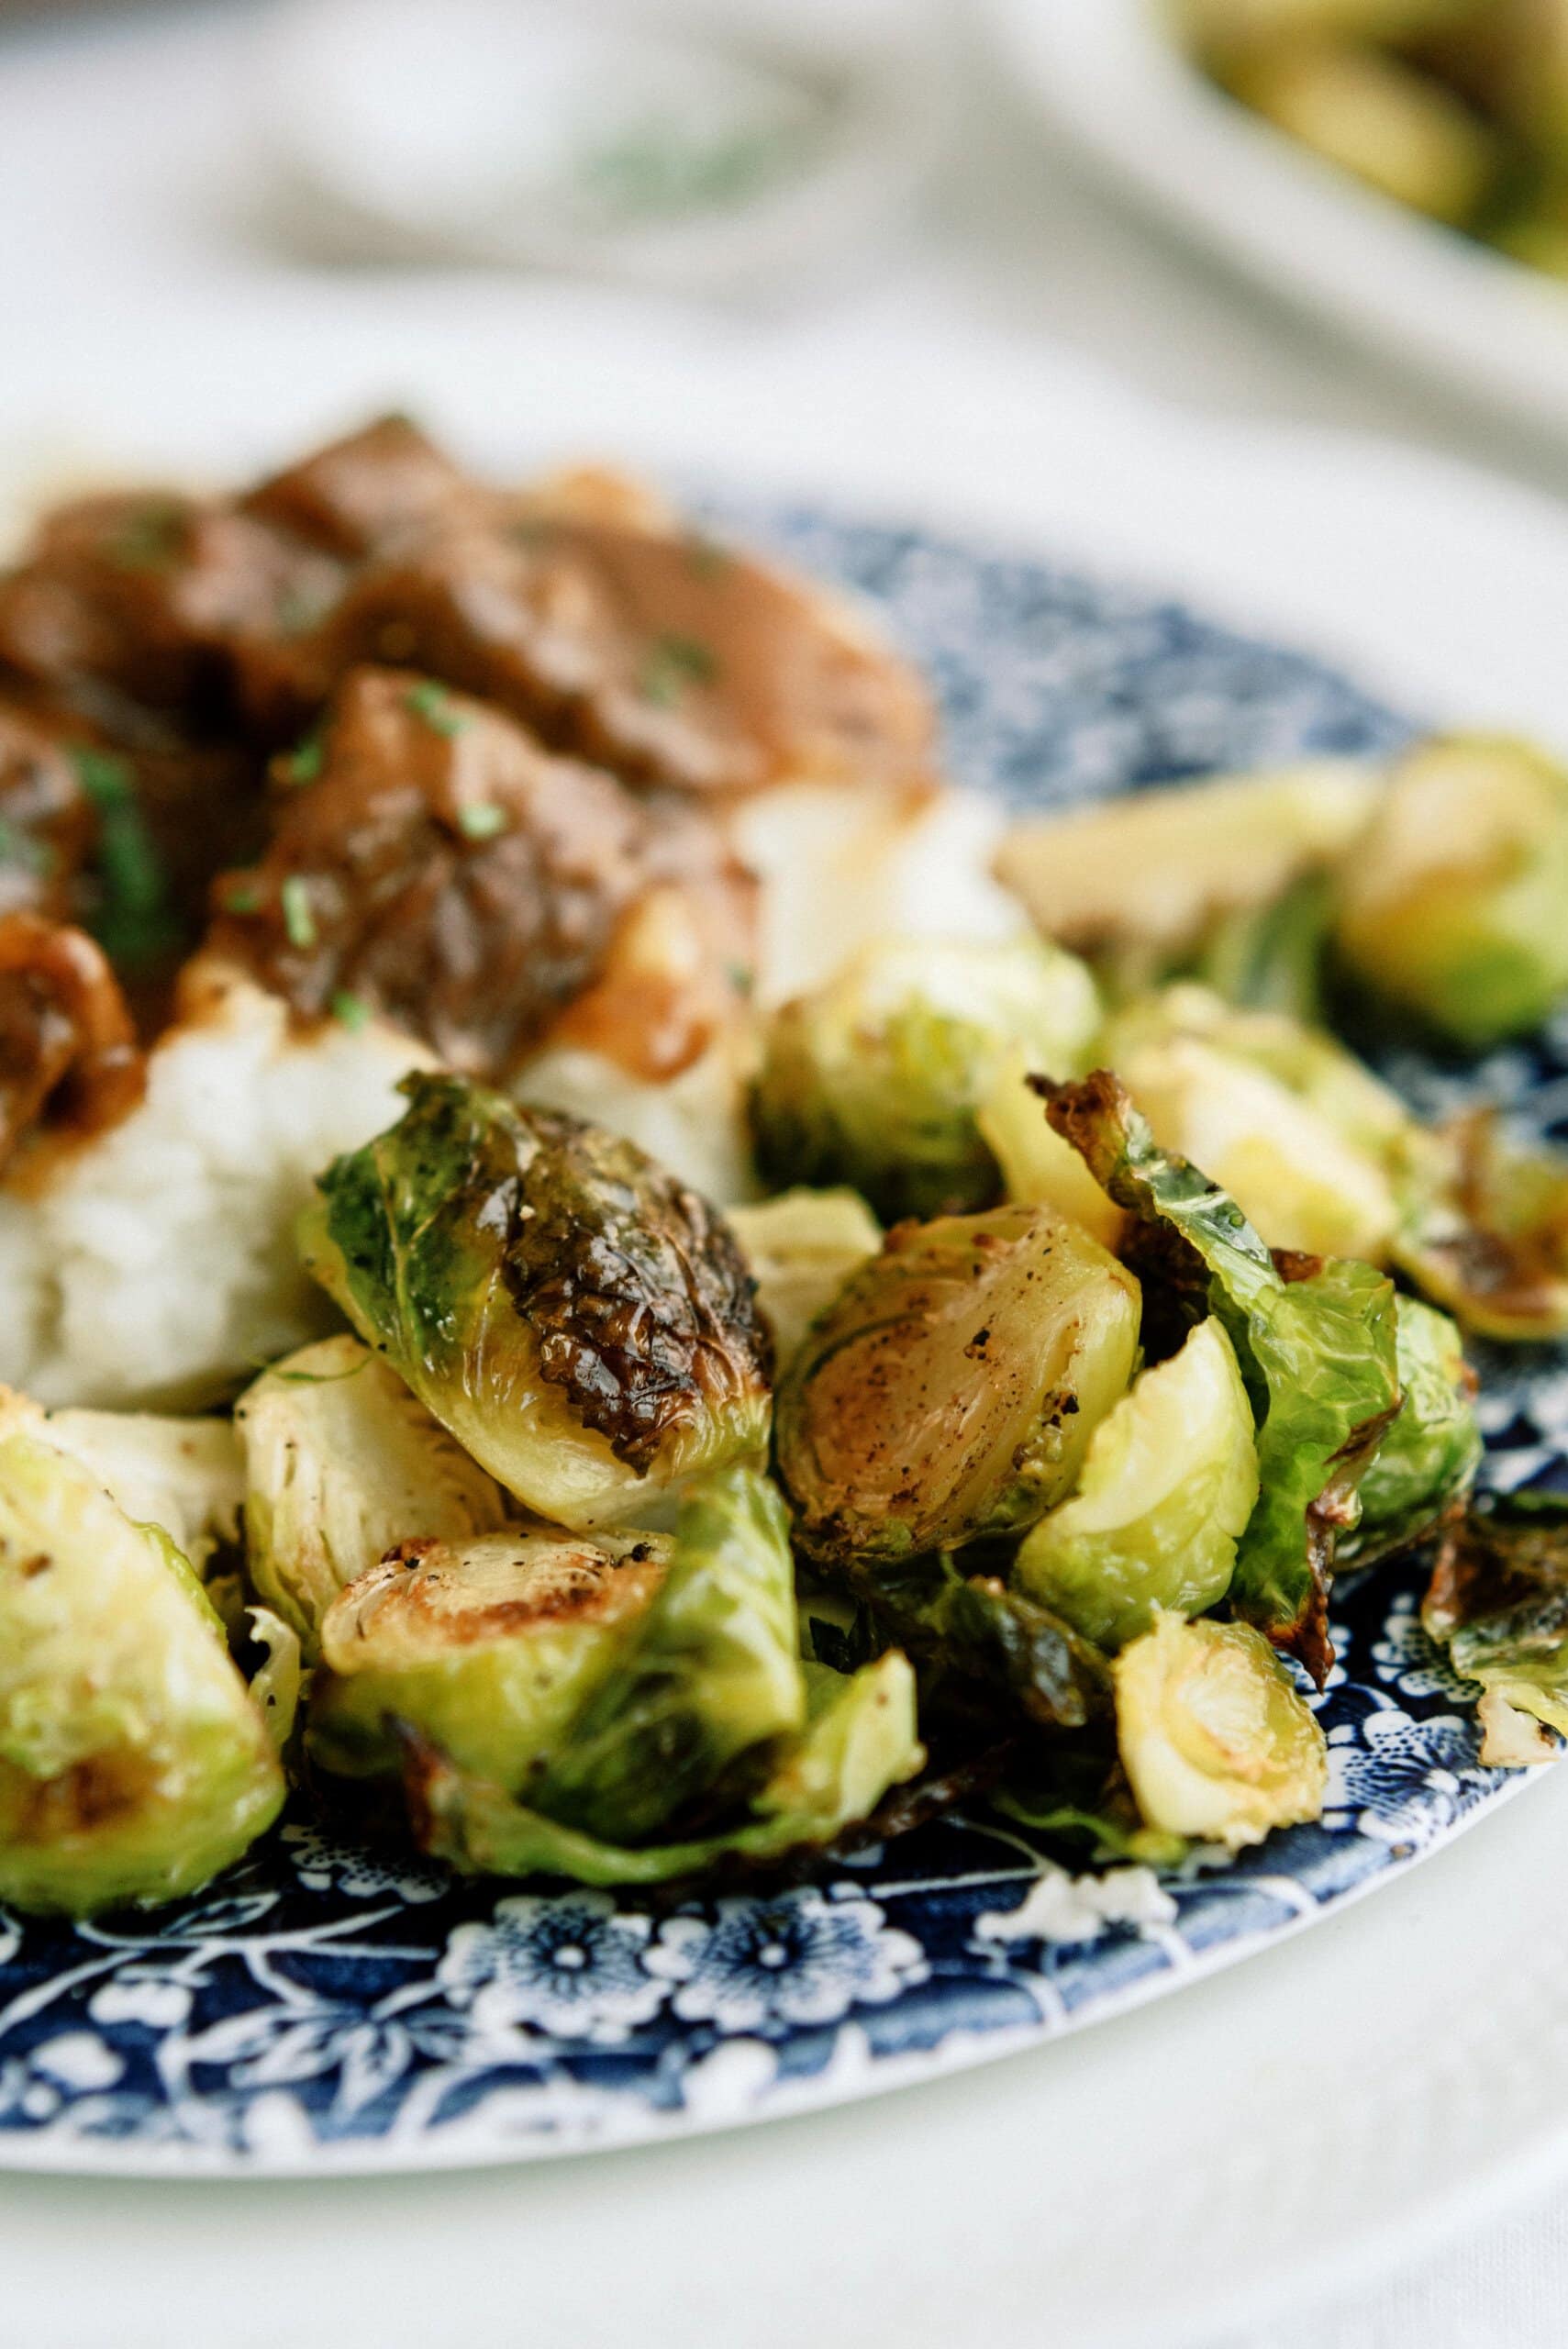 roasted brussel sprouts on a plate with other food